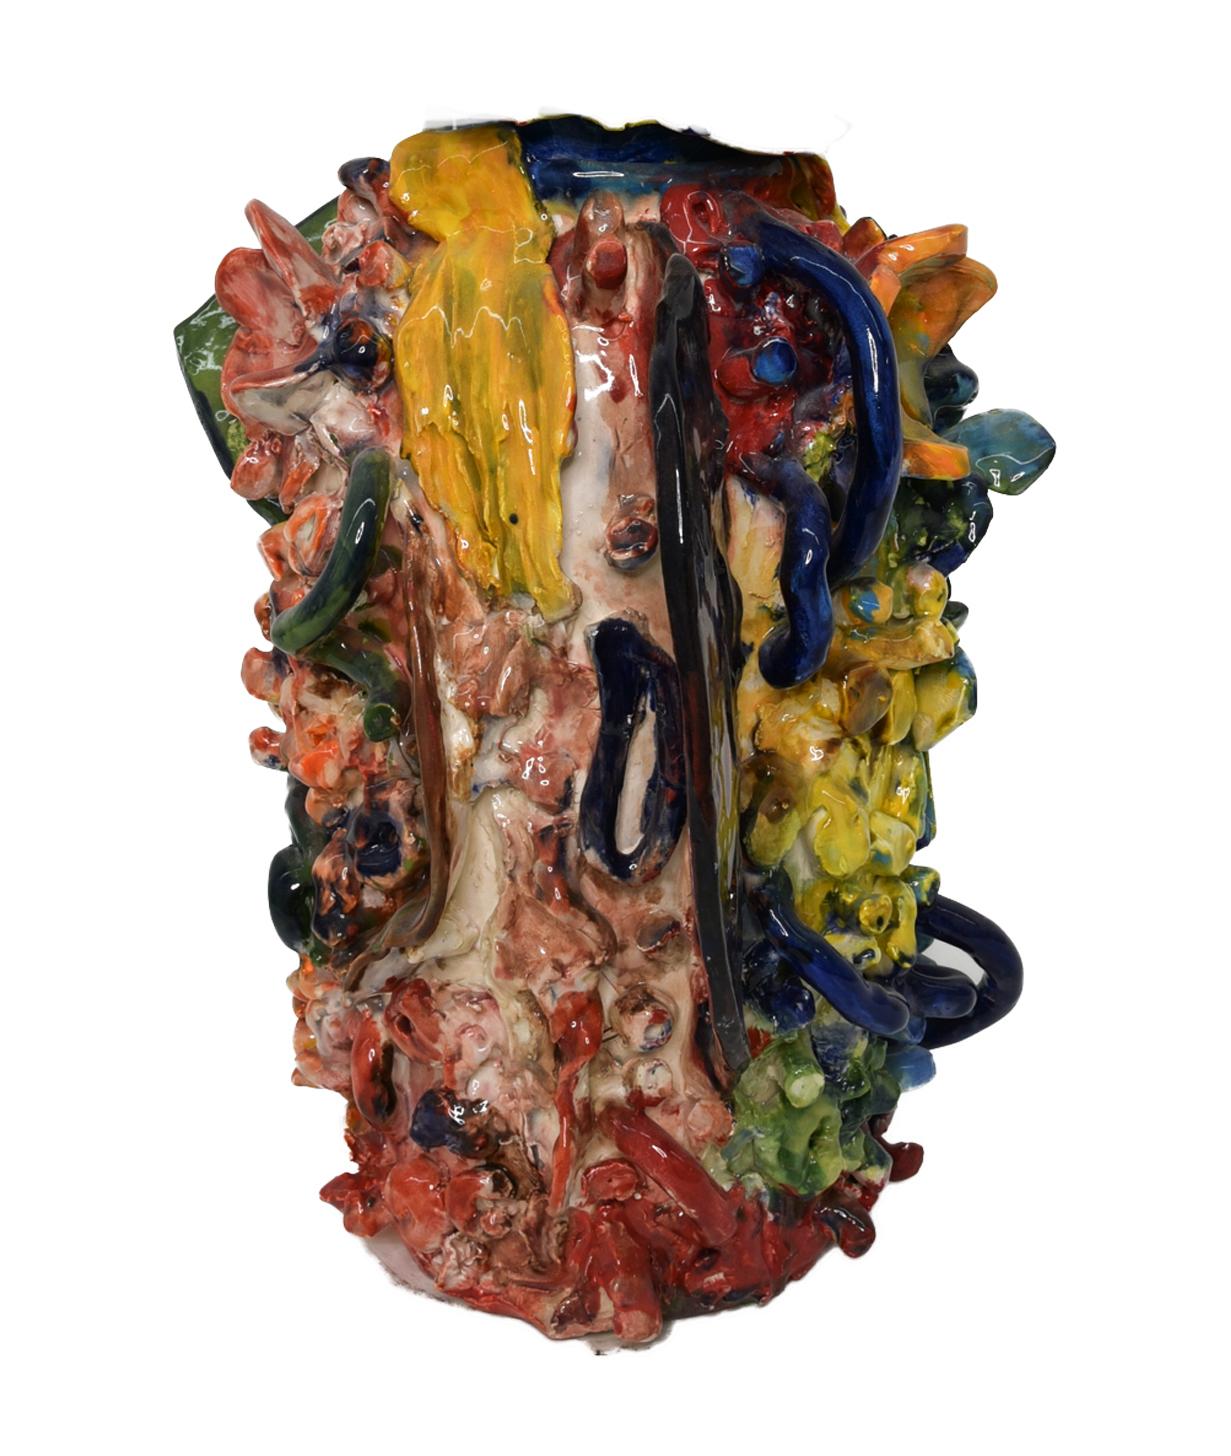 It’s a Party. Glazed ceramic abstract jar sculpture - Abstract Sculpture by Charo Oquet